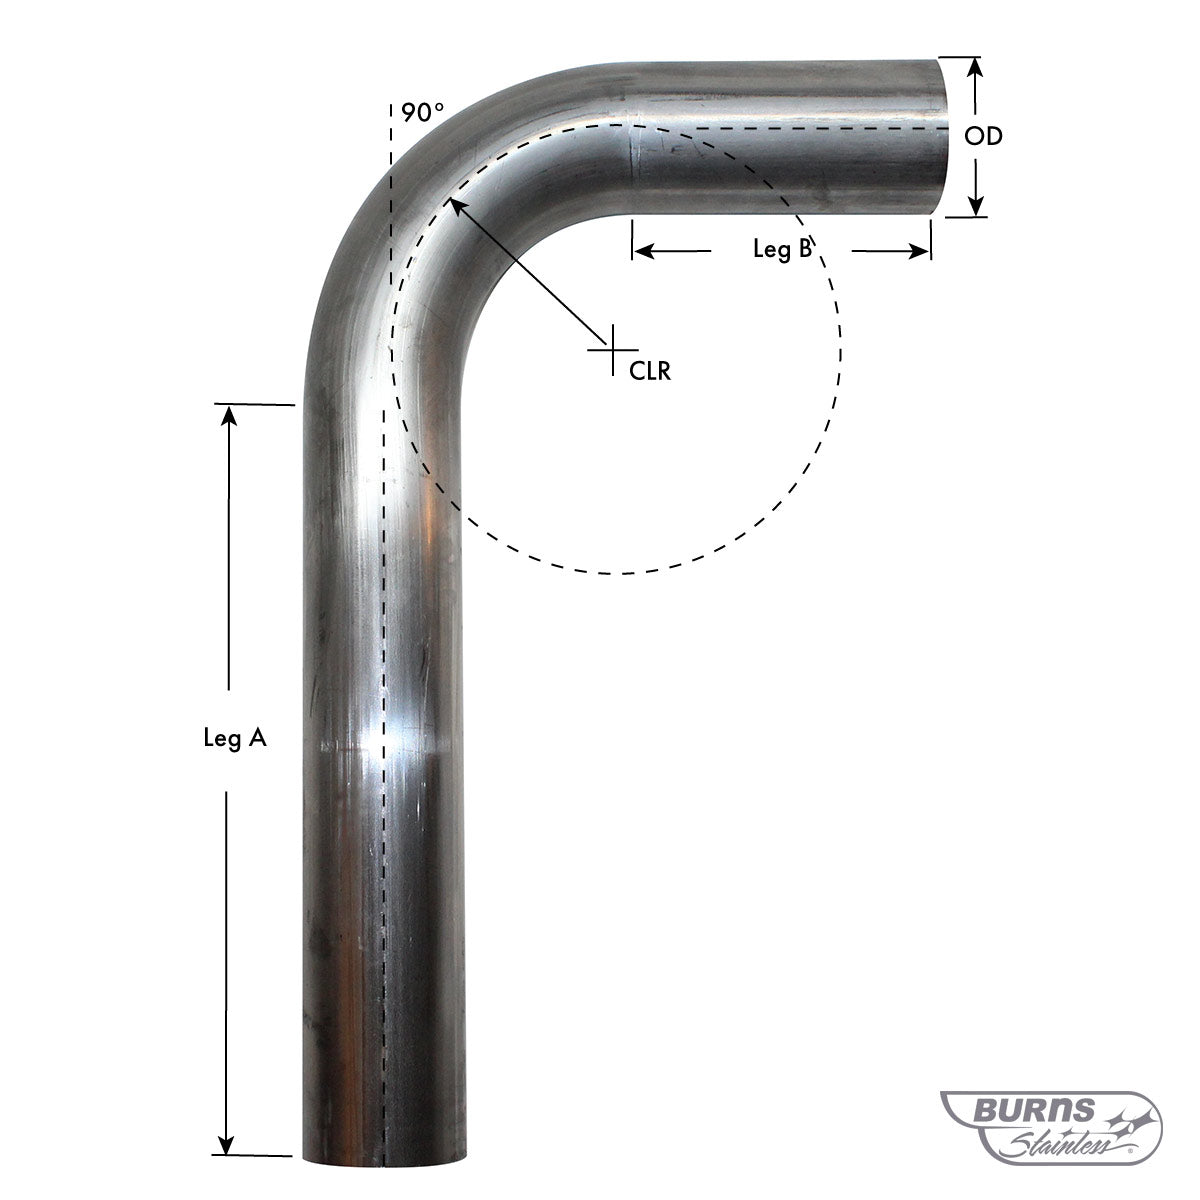 Stainless Steel Flexible Exhaust Pipe - 24 Long x 3.5 ID